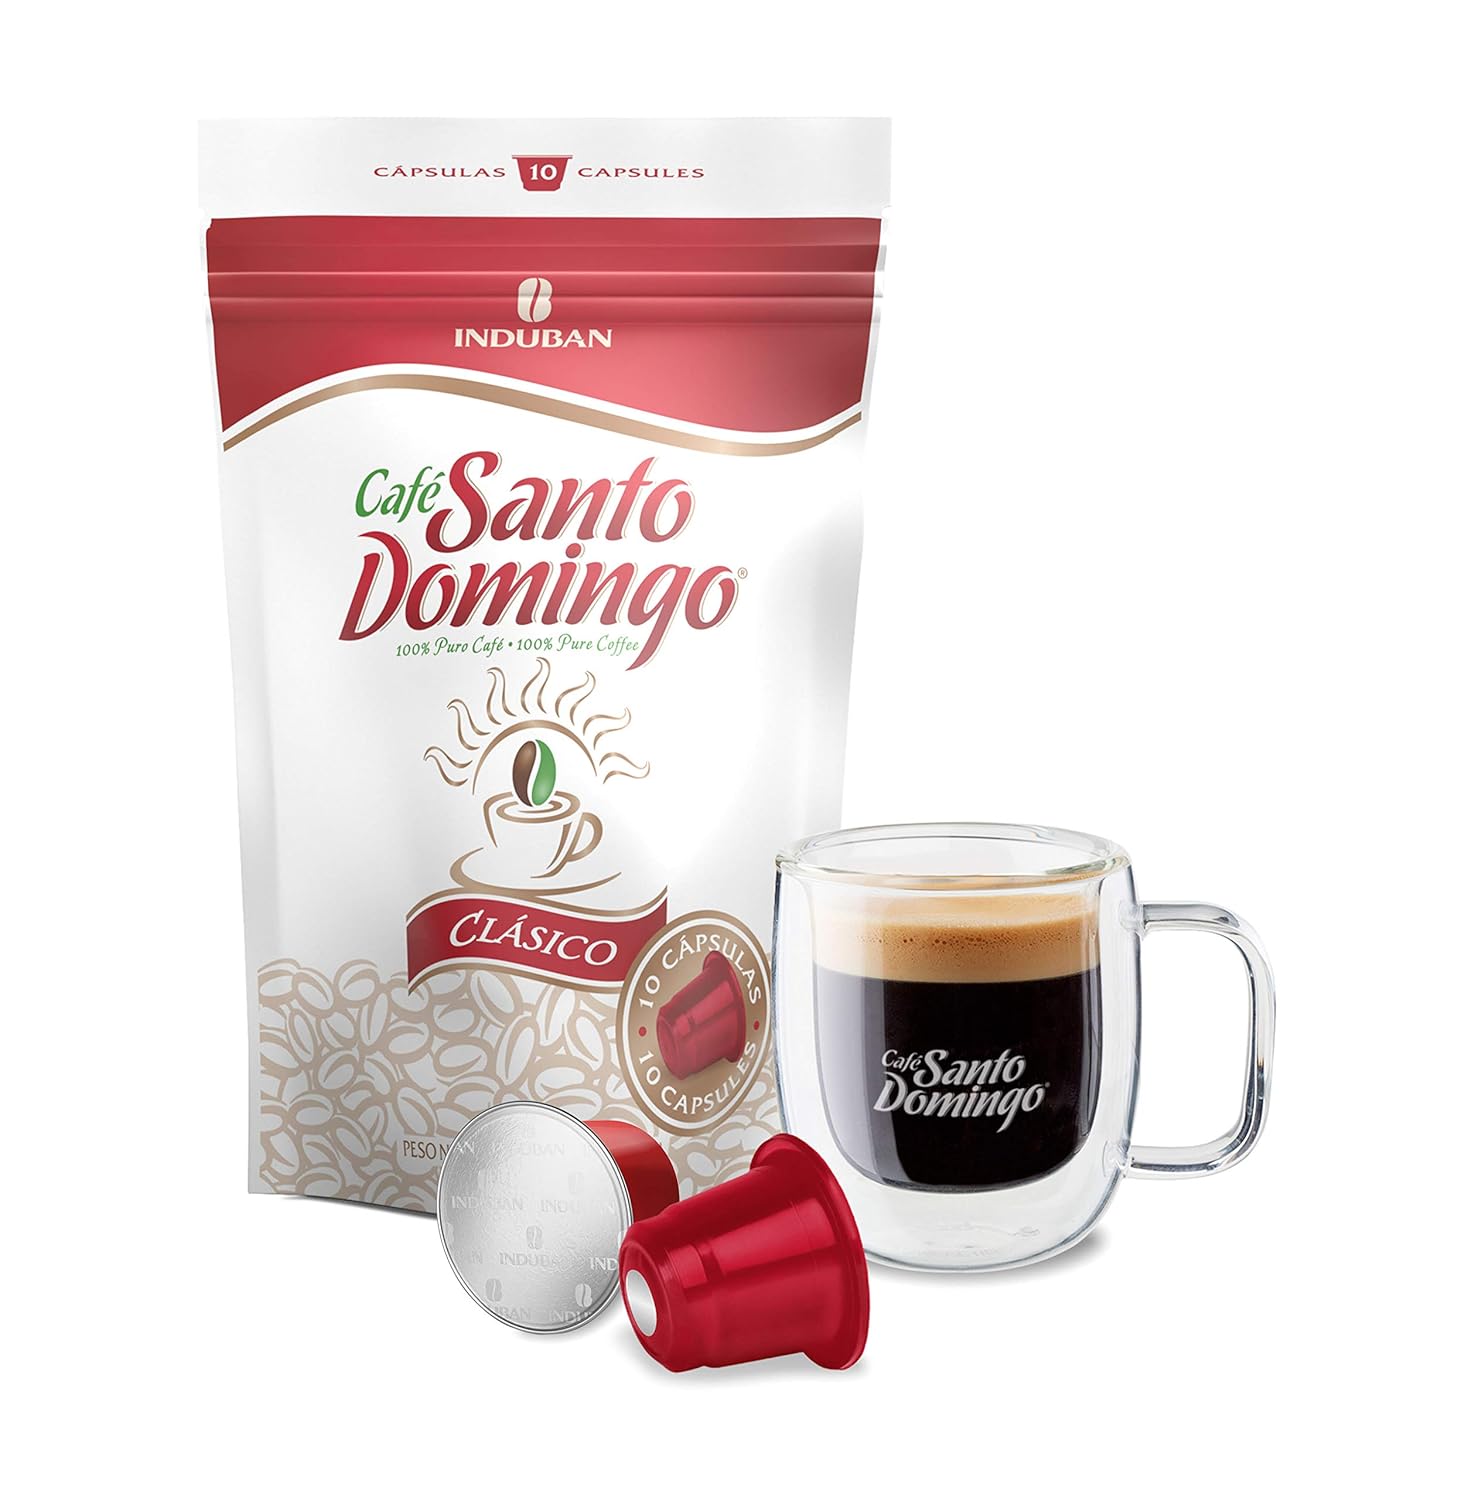 Santo Domingo Coffee Capsules - Compatible with Nespresso Original Brewers - Product from the Dominican Republic (10 Count) : Grocery & Gourmet Food